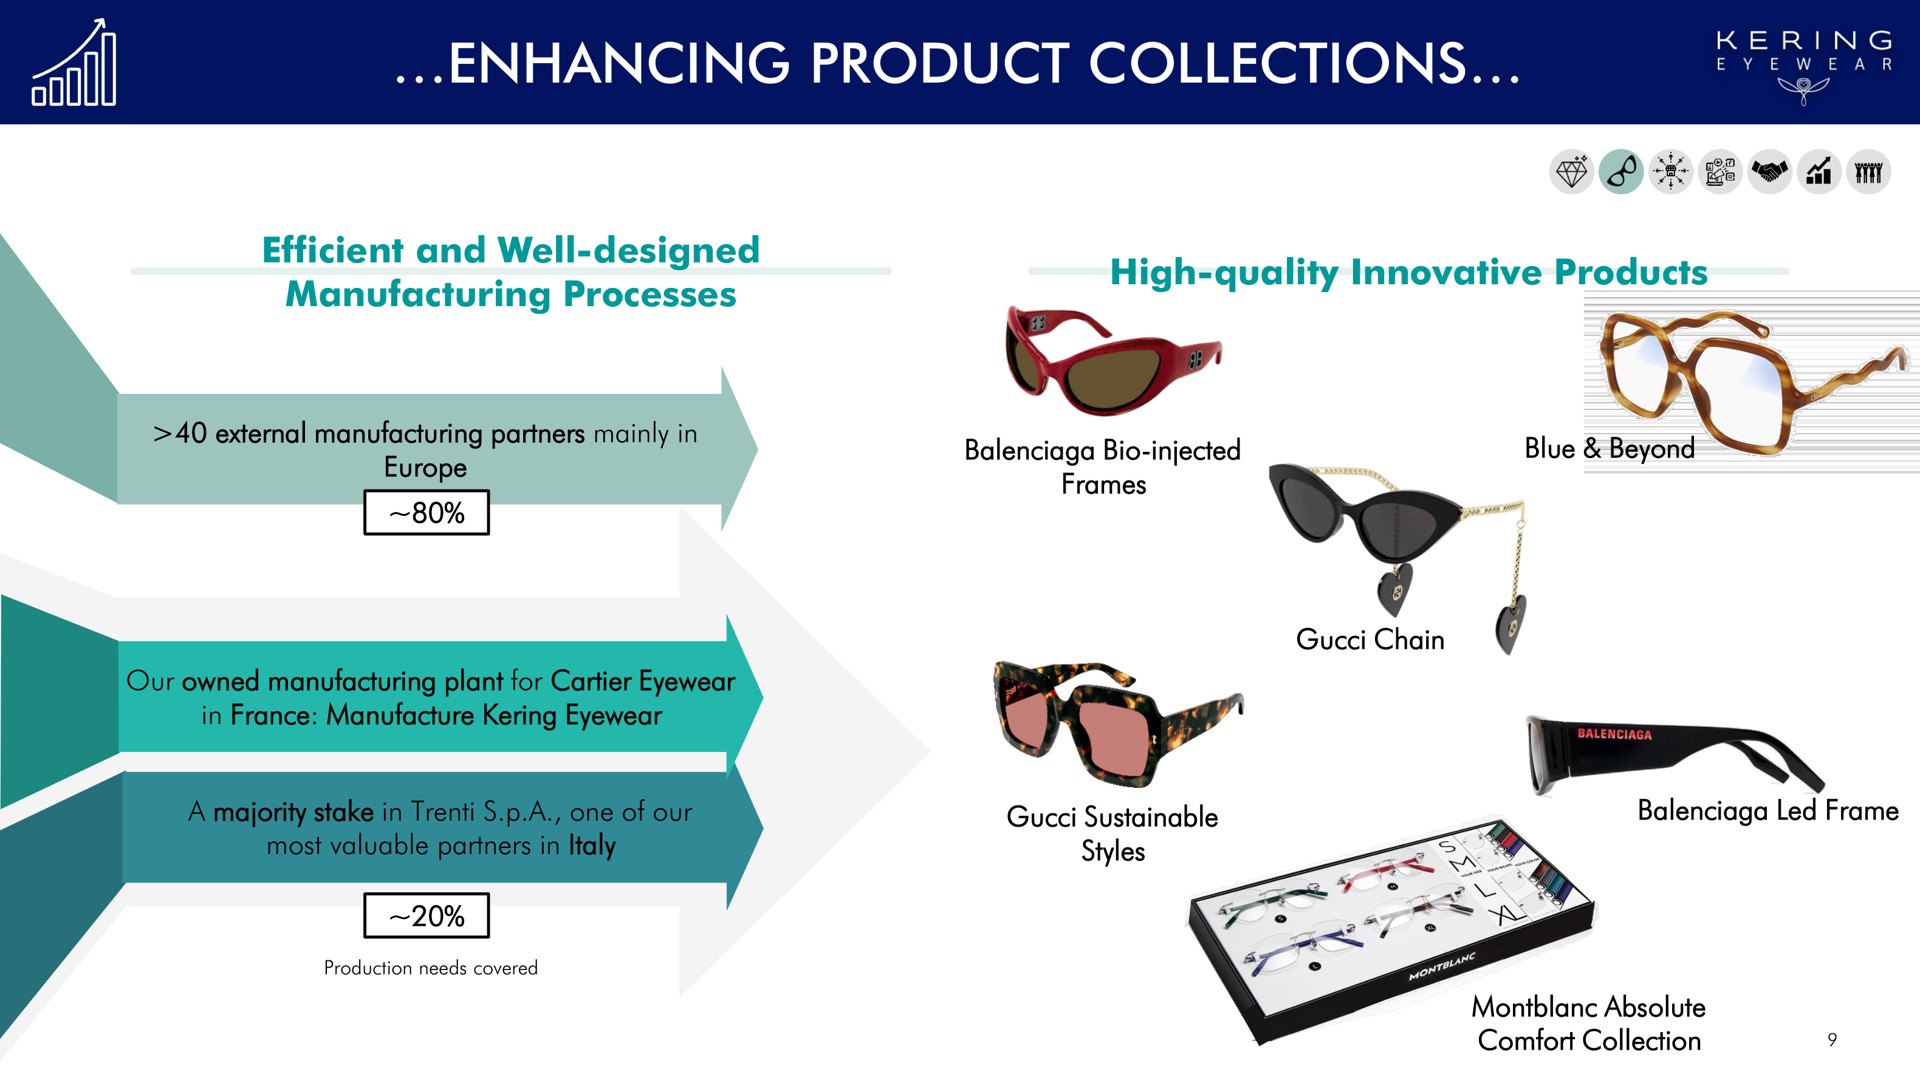 enhancing product collections | Kering